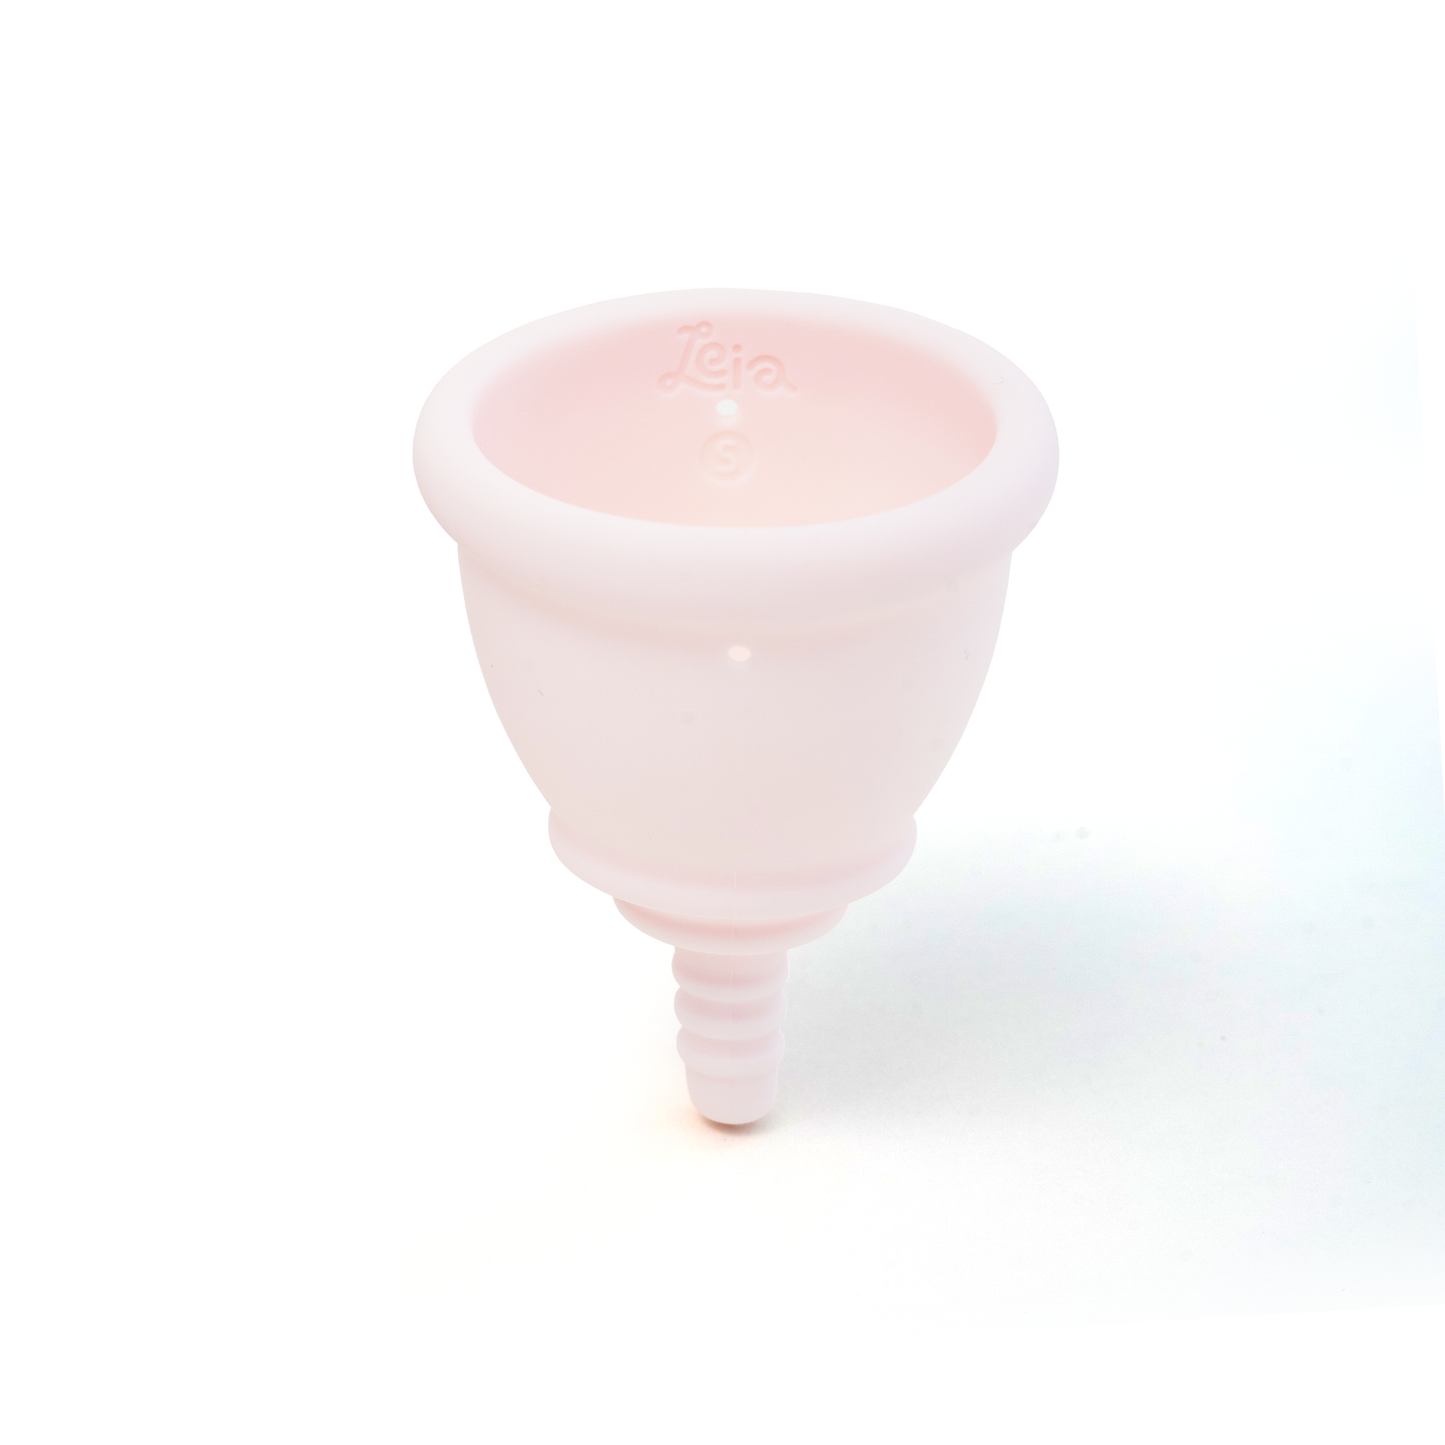 -15% — LEIA Menstrual Cup — Size S